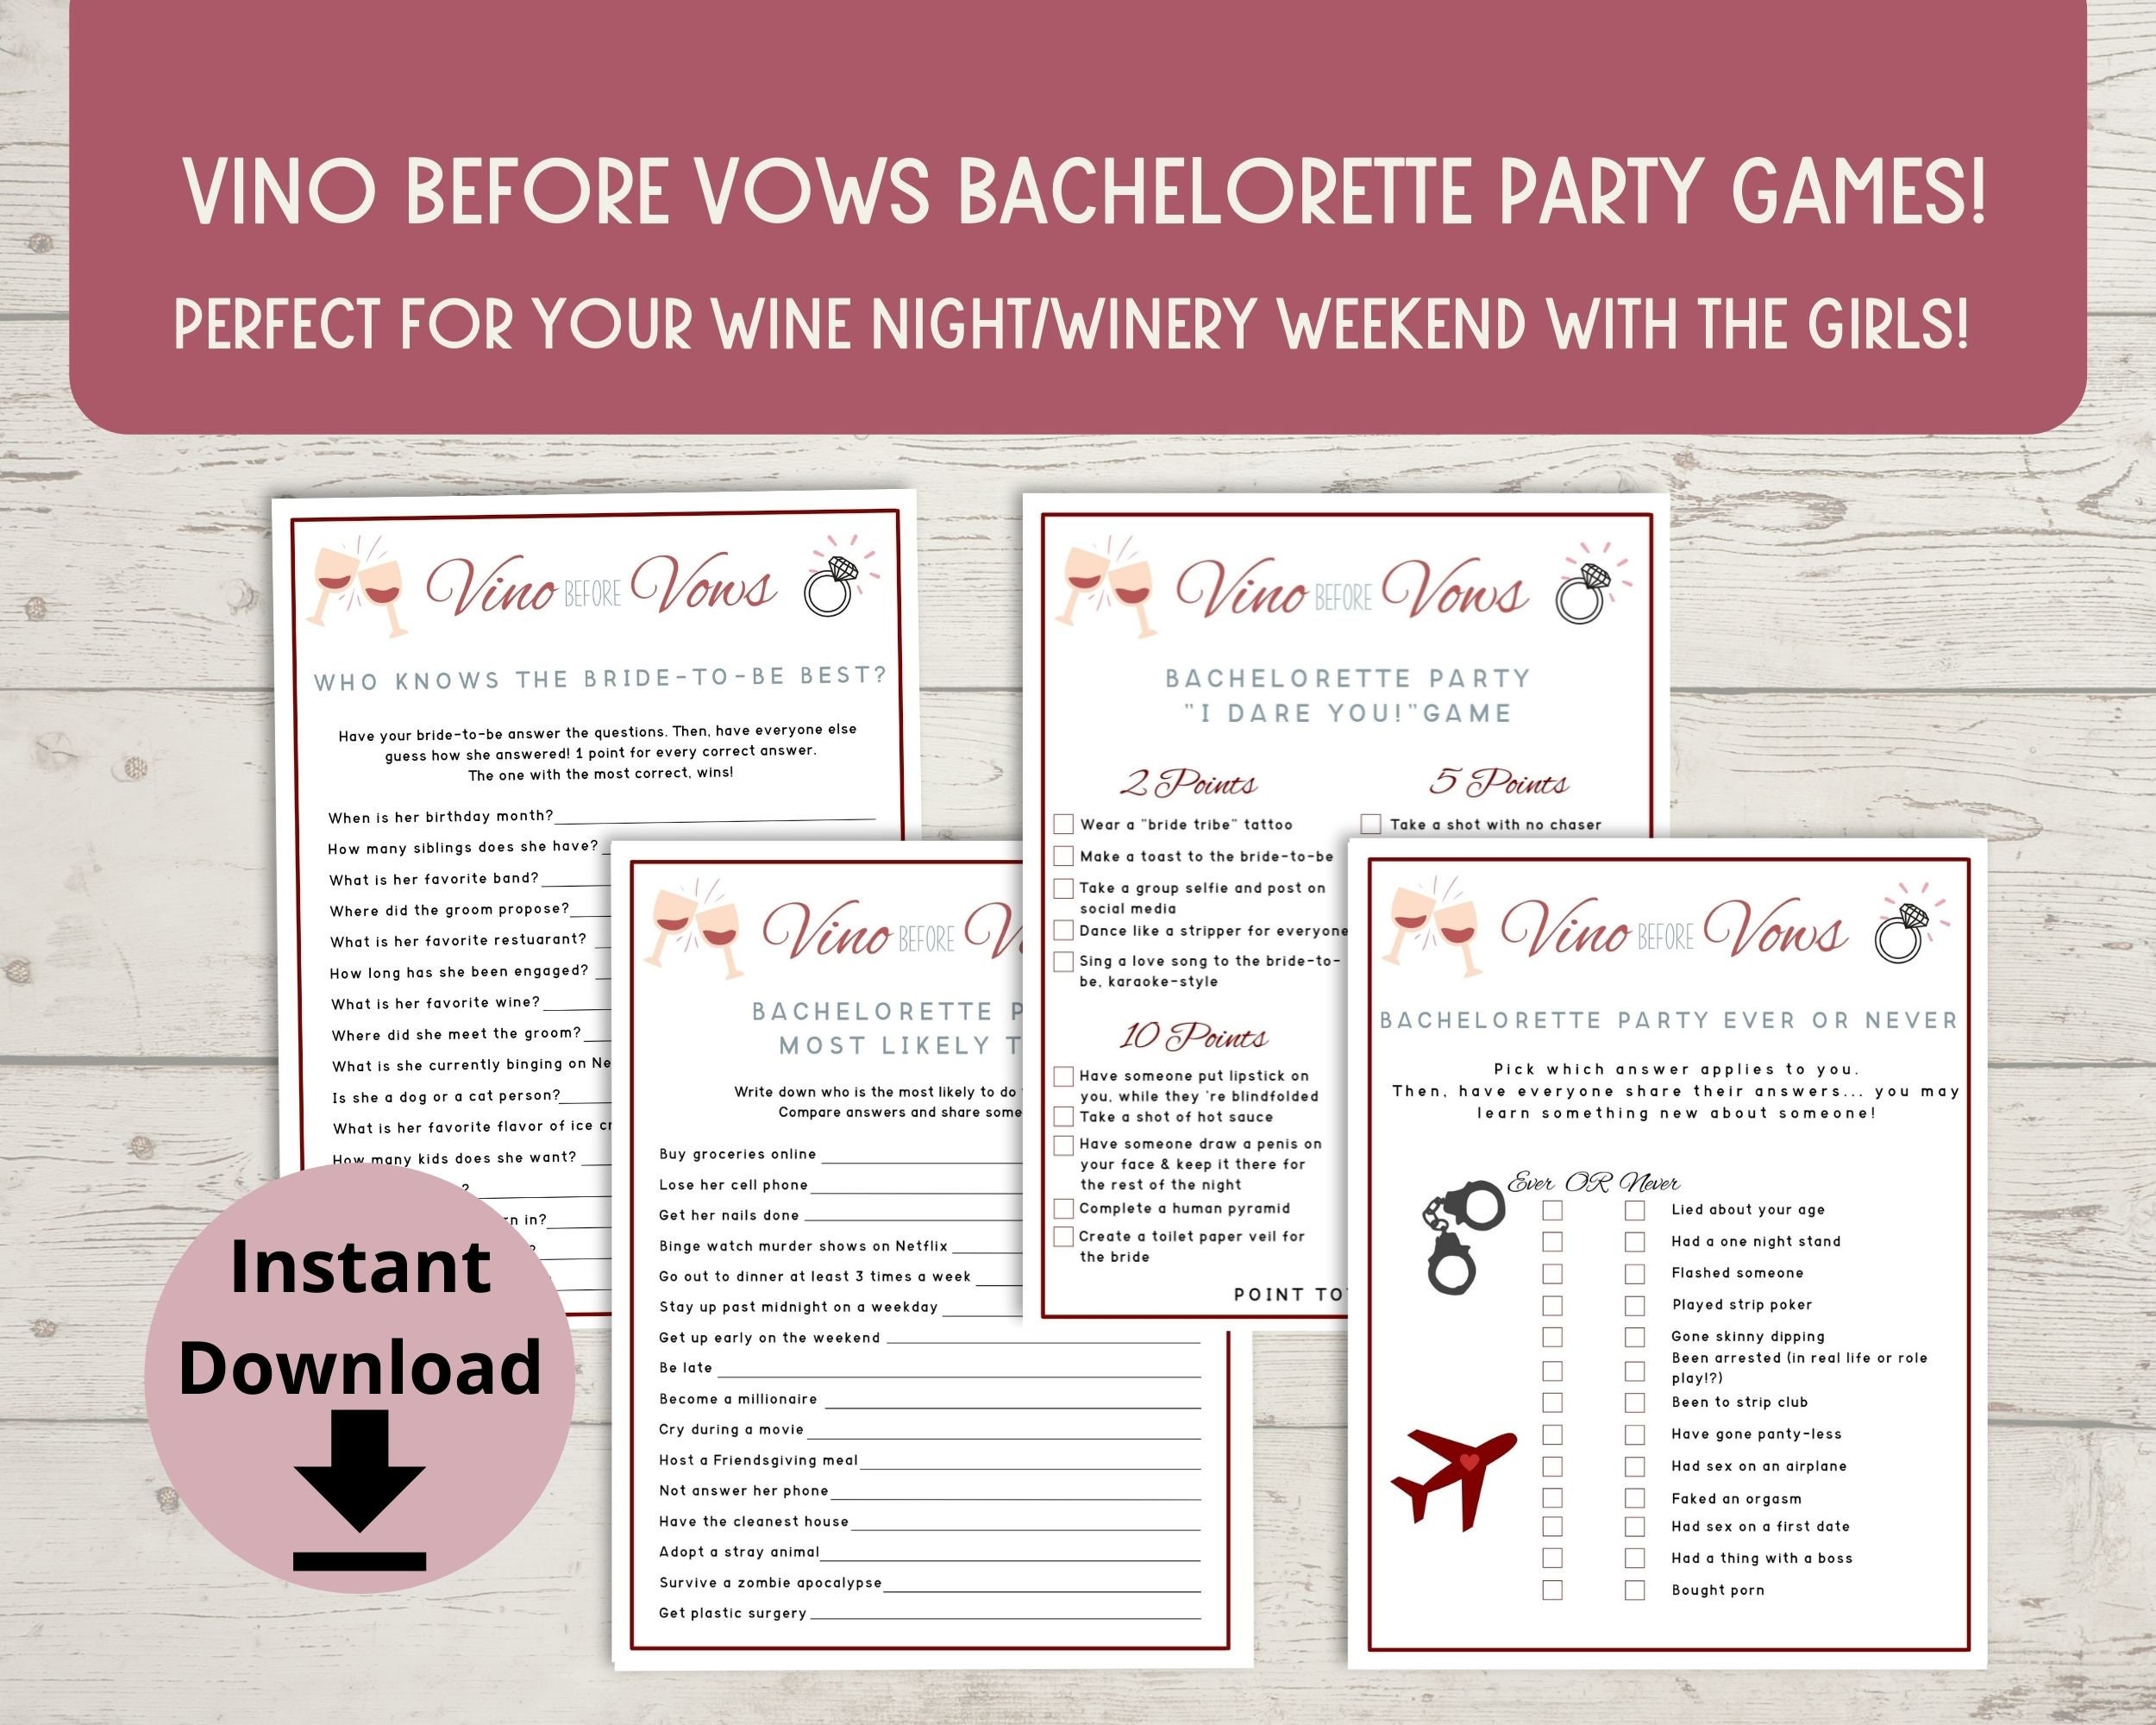 13 Napa Bachelorette Party Favors the Bride Will Love - The Swag Elephant